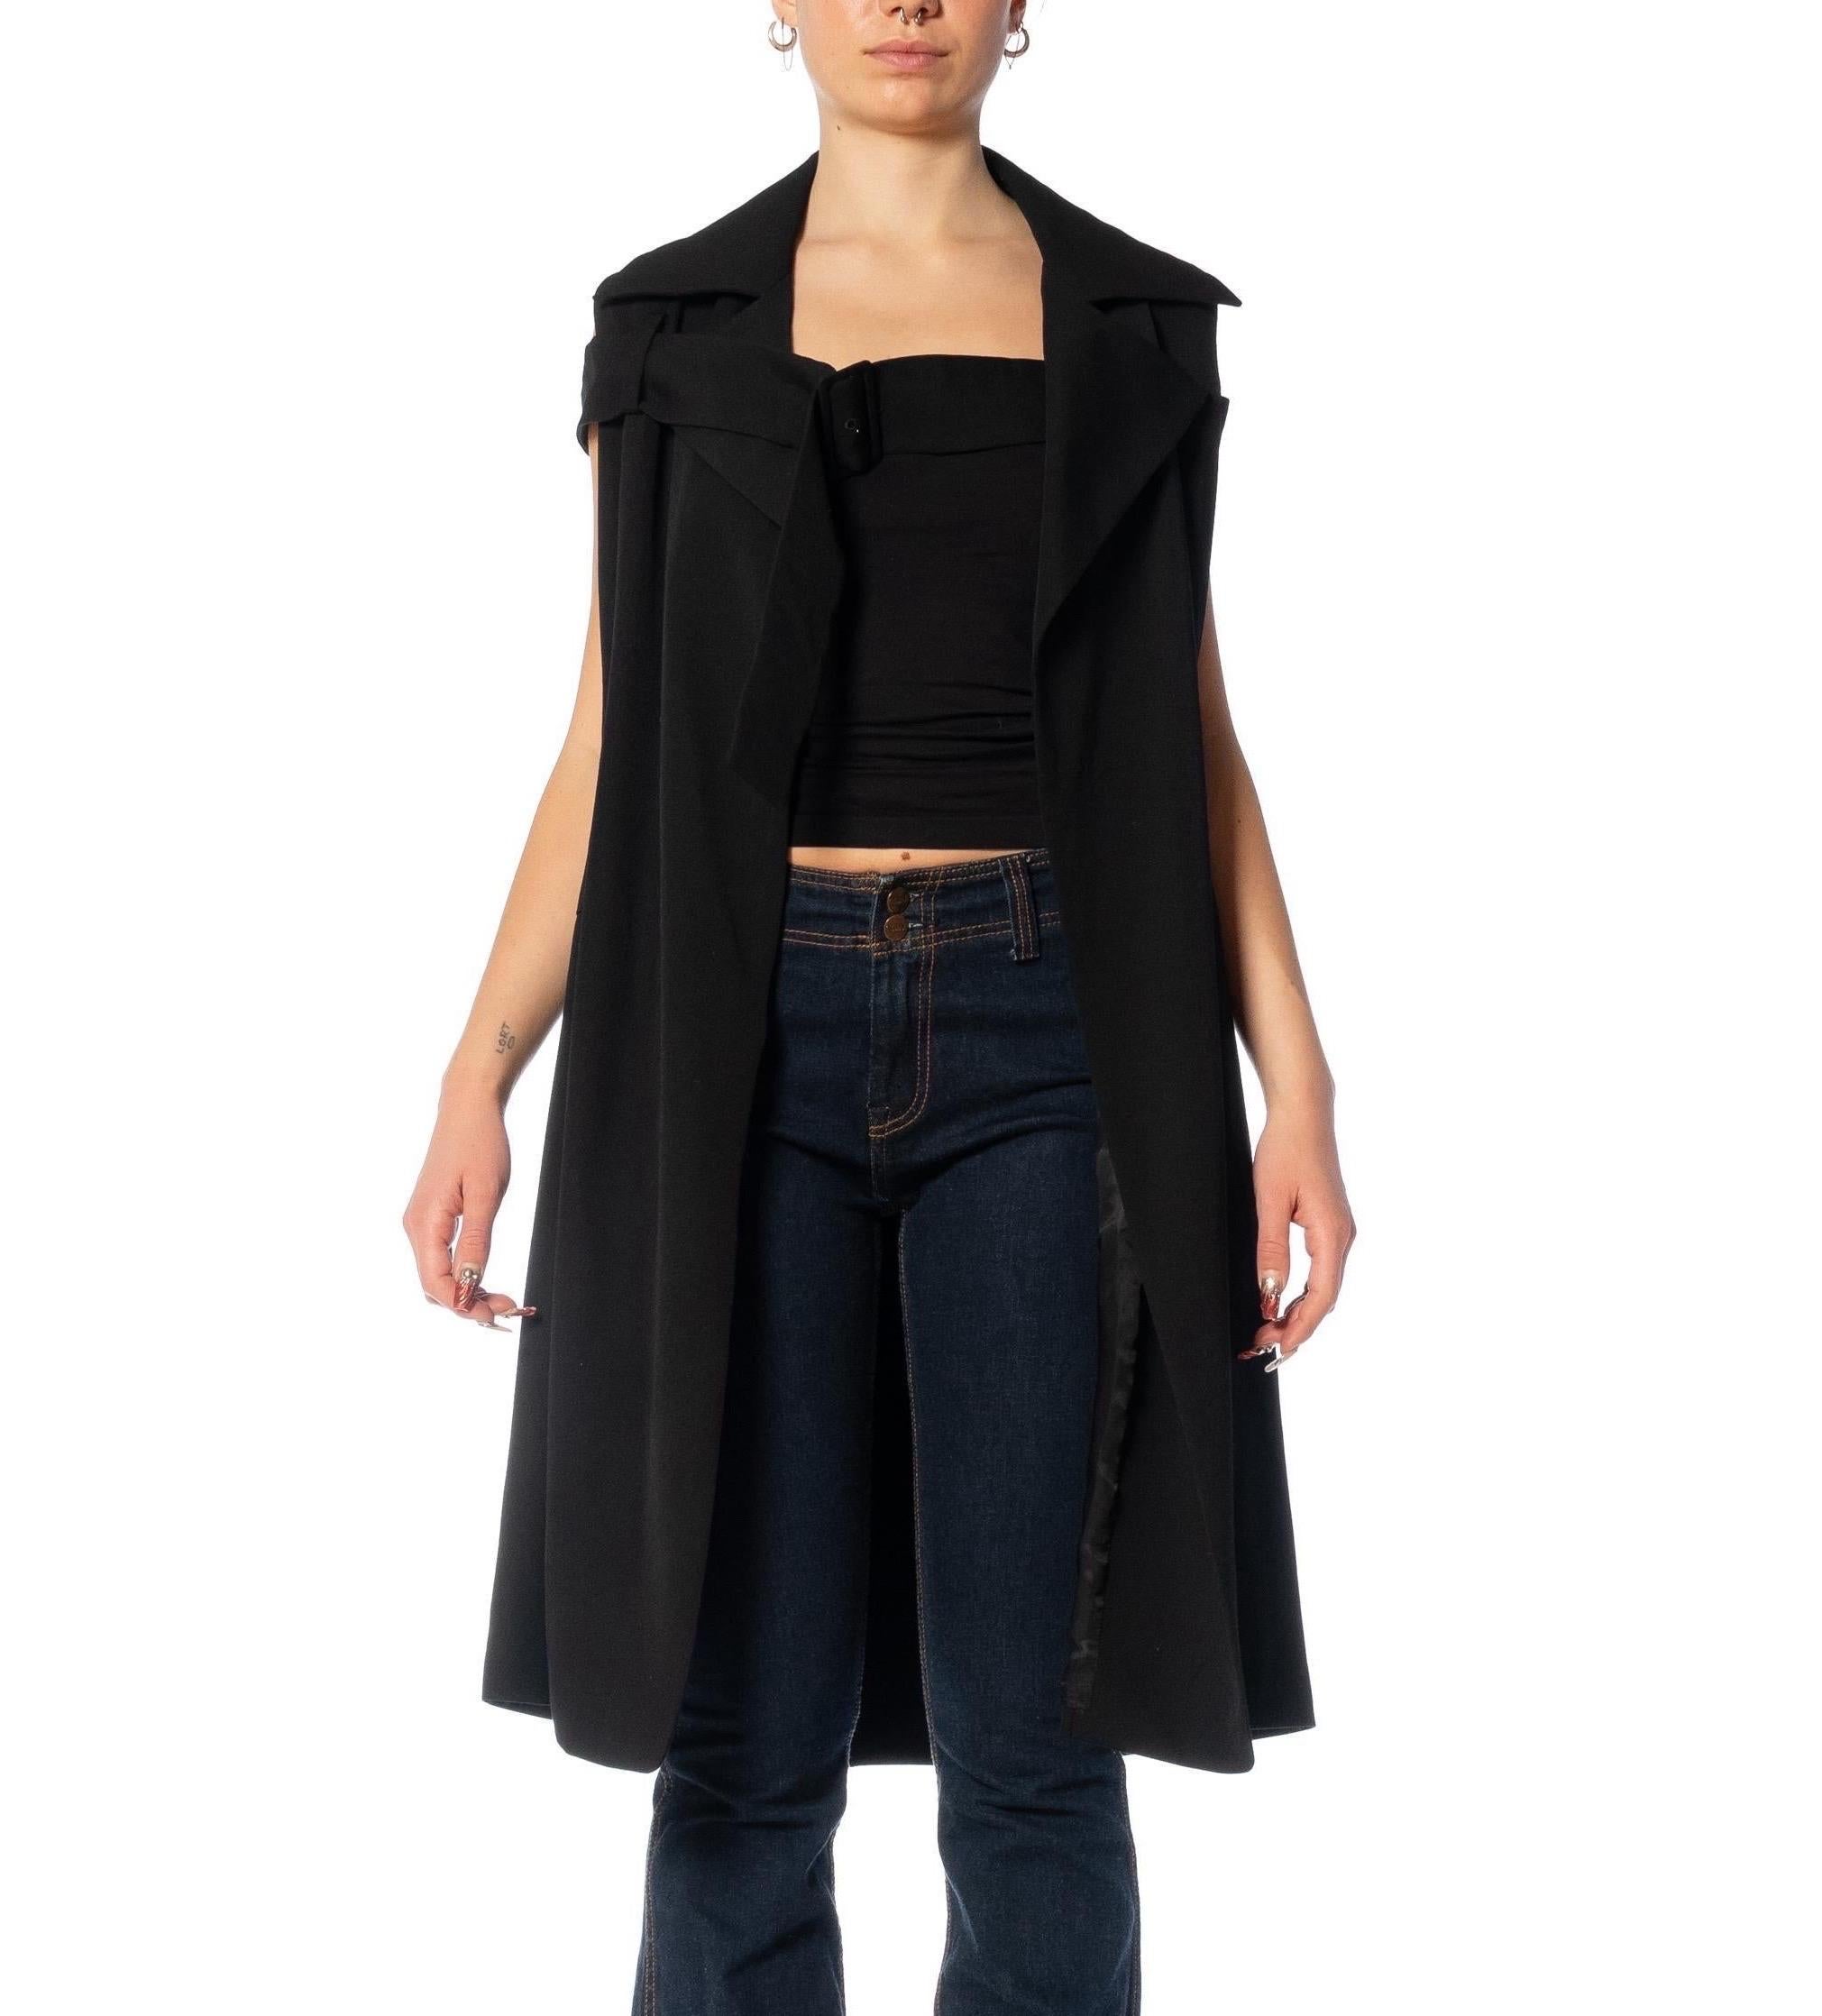 1990S COMPOSITION YOHJI YAMAMOTO Black Wool Sleeveless Coat With Bust Belt In Excellent Condition For Sale In New York, NY